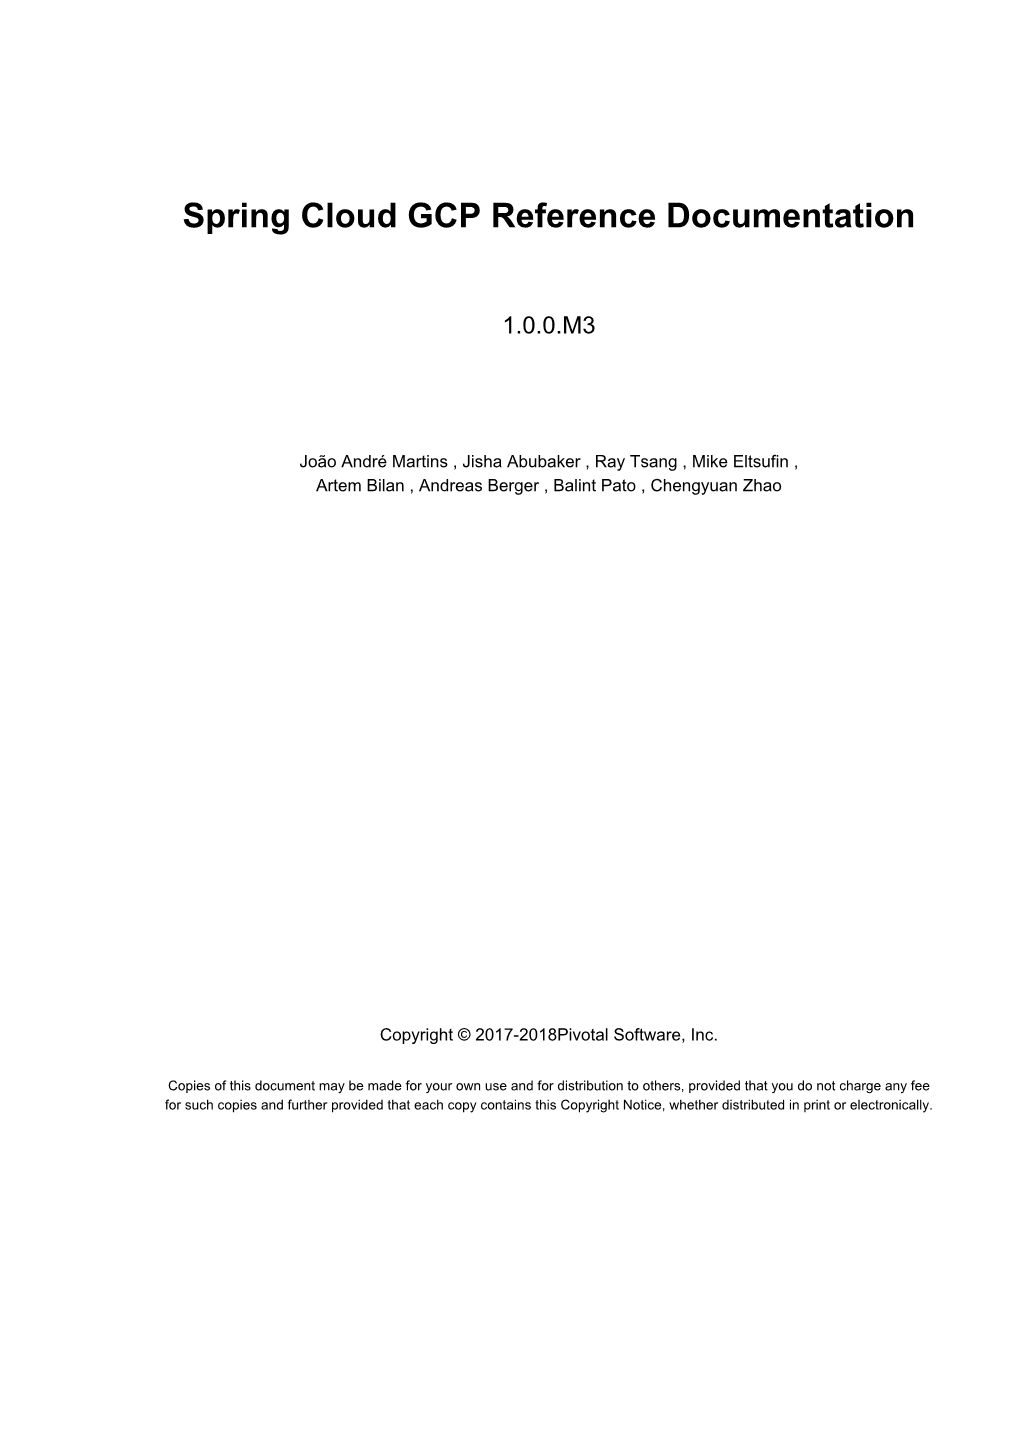 Spring Cloud GCP Reference Documentation